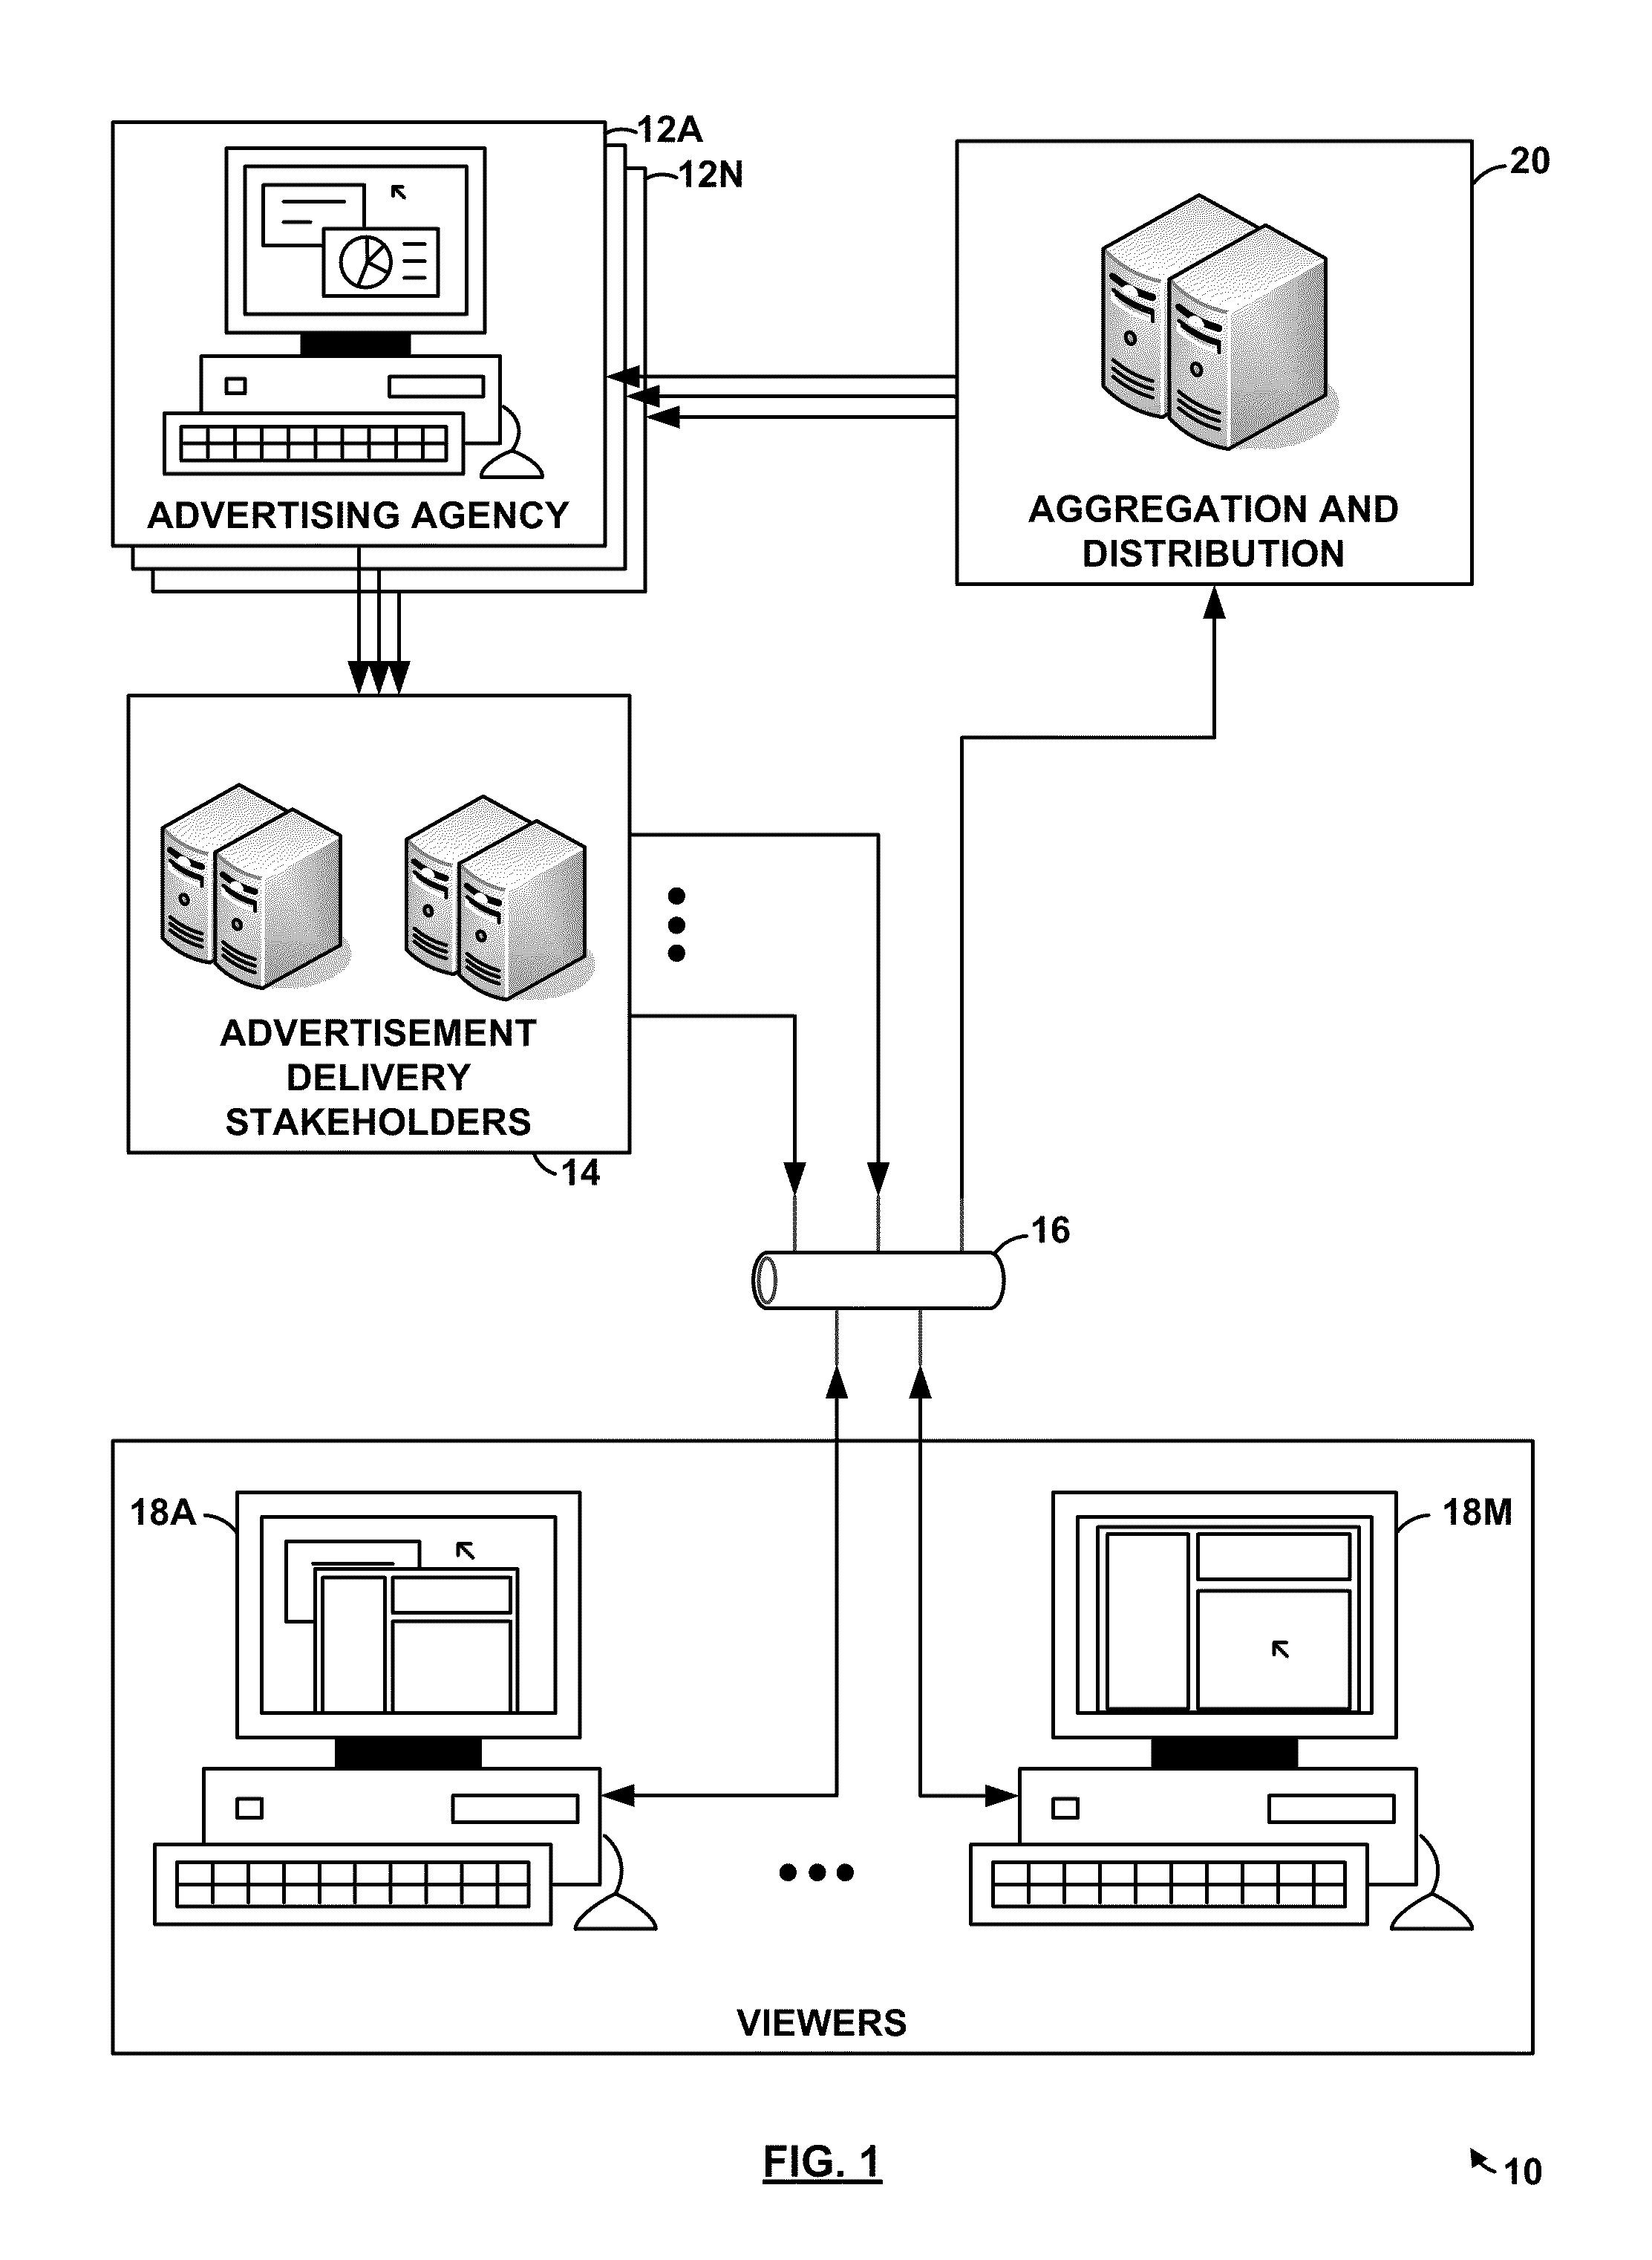 System and method for measuring effectiveness of electronically presented advertizing